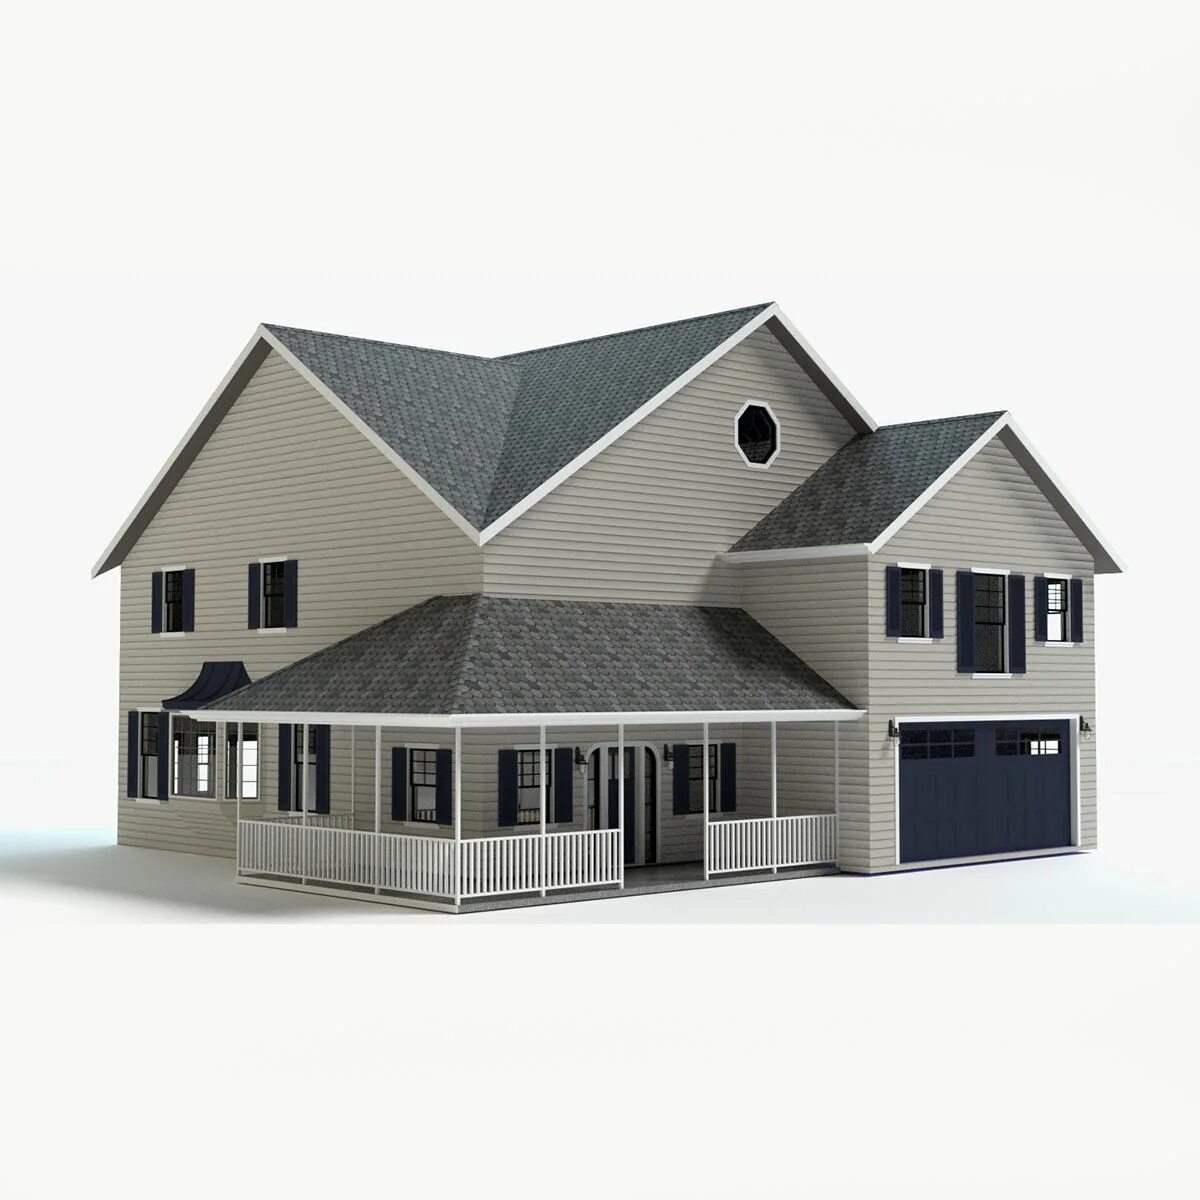 House 3ds Max. 3ds Max model dom. 3ds Max дом ong. 3ds Max модели домов. 3 модель дома